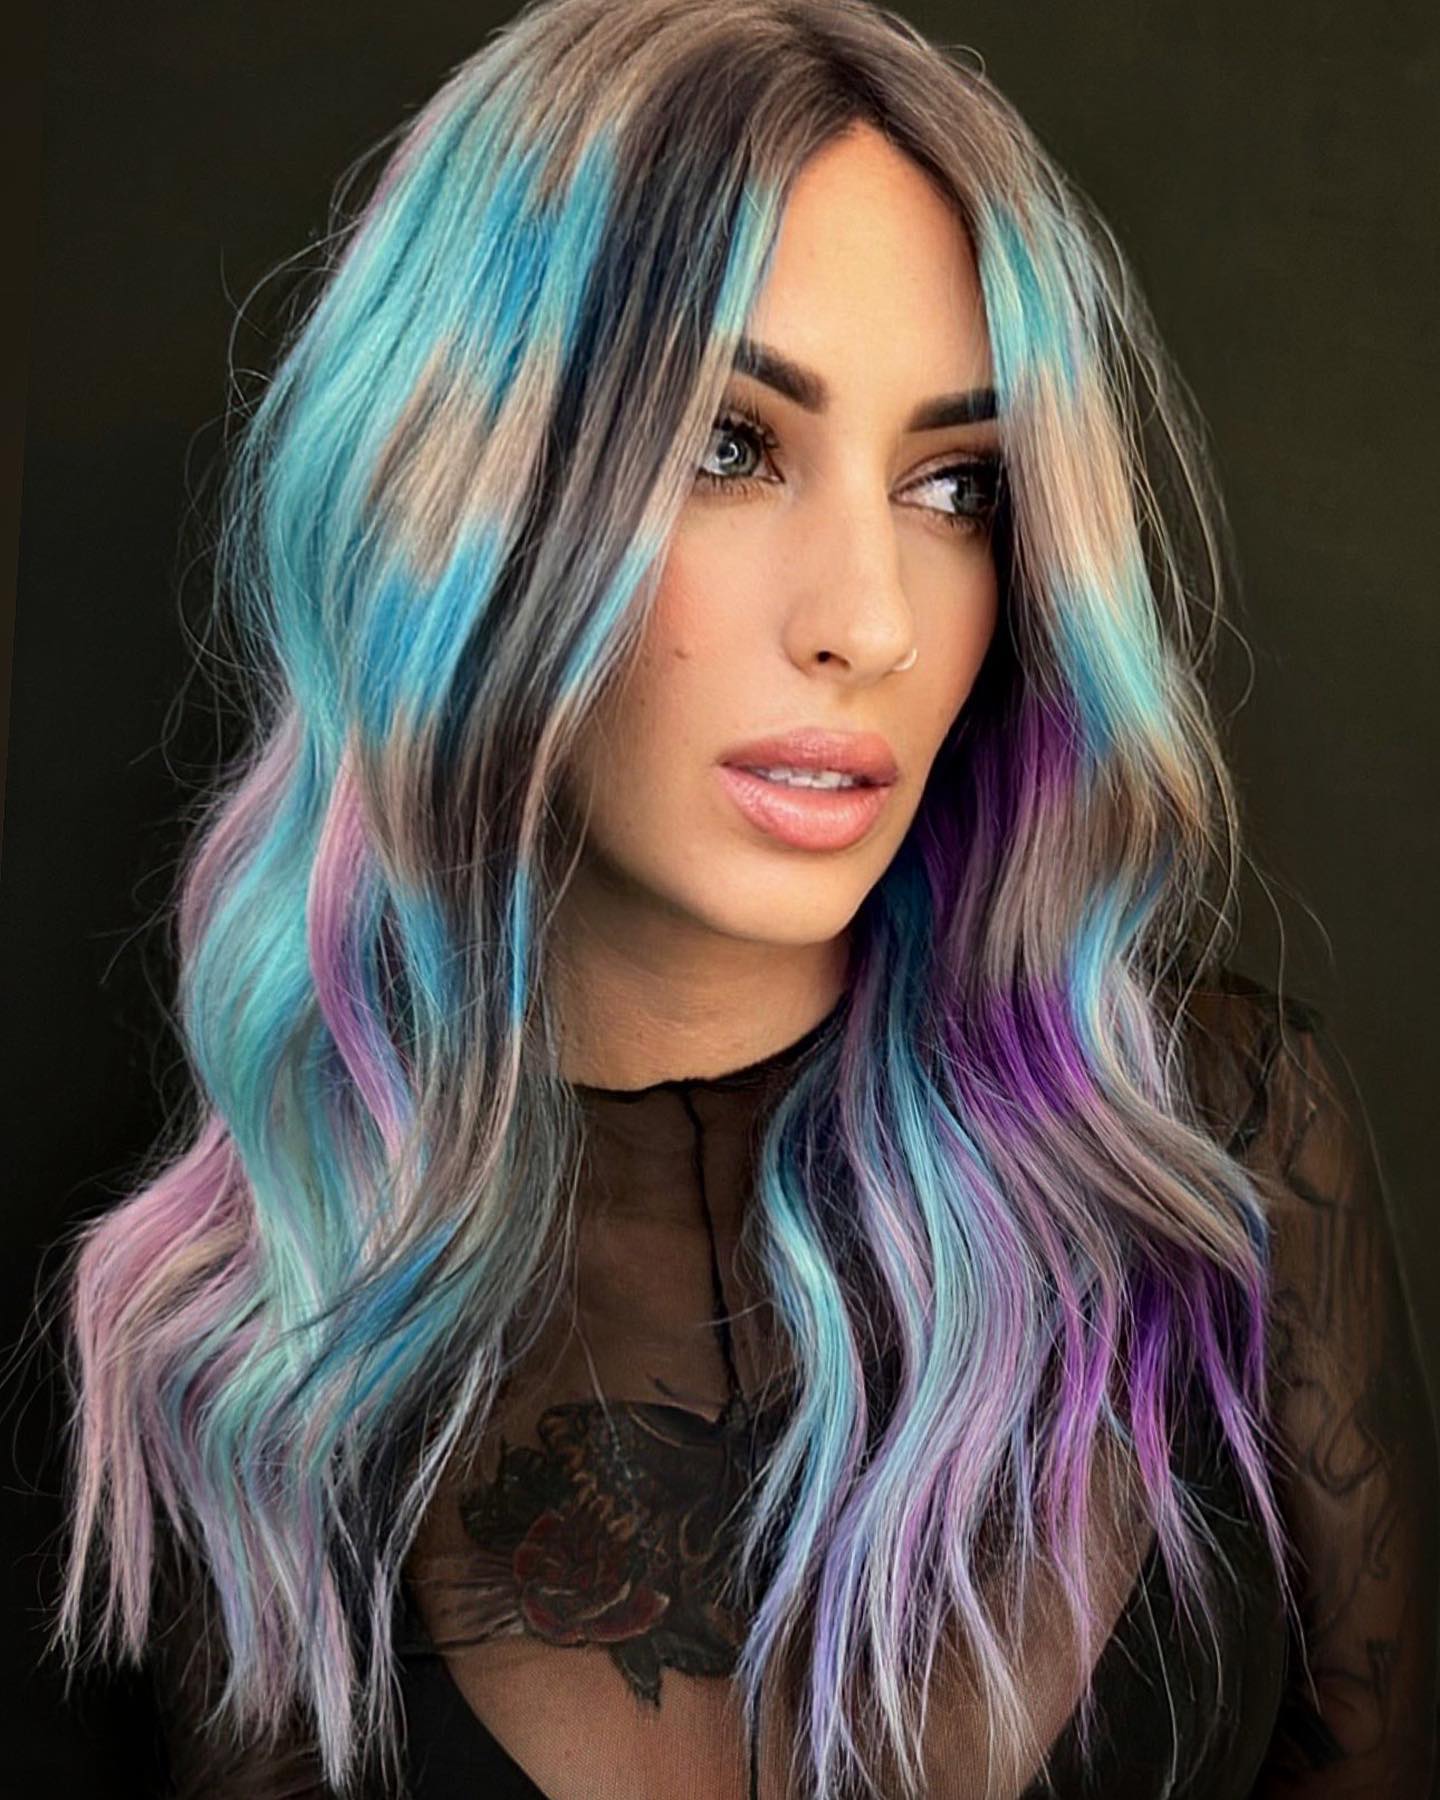 100+ Best Colorful Hair Ideas images 26